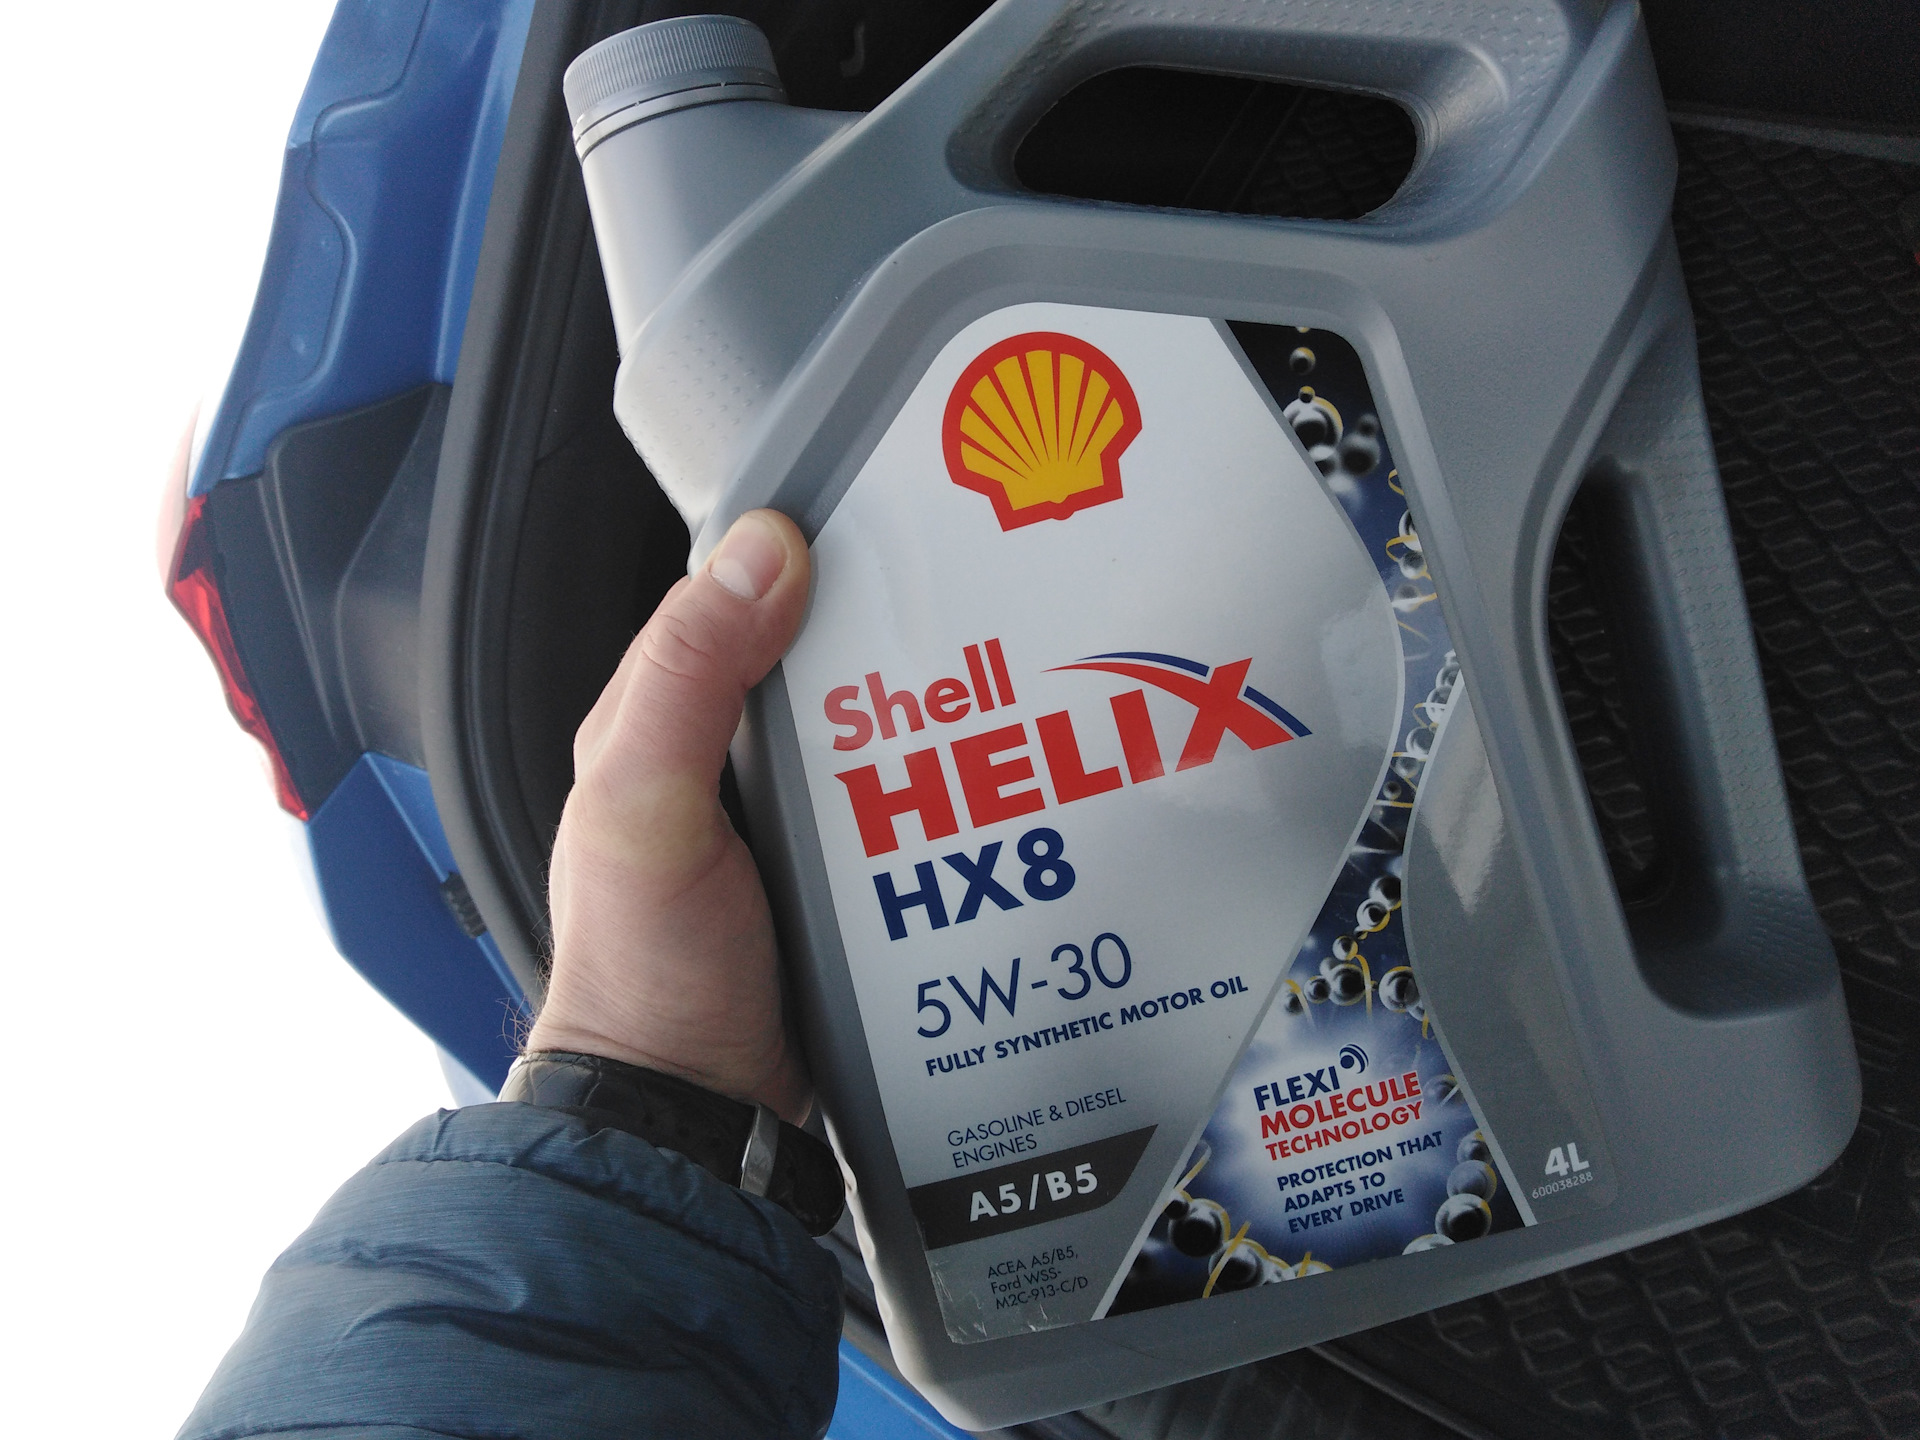 Shell Helix 550046777. Масло Шелл 550046777. 550046777 Лукойл. 550046777 Льет Лукойл. Озон масло шелл